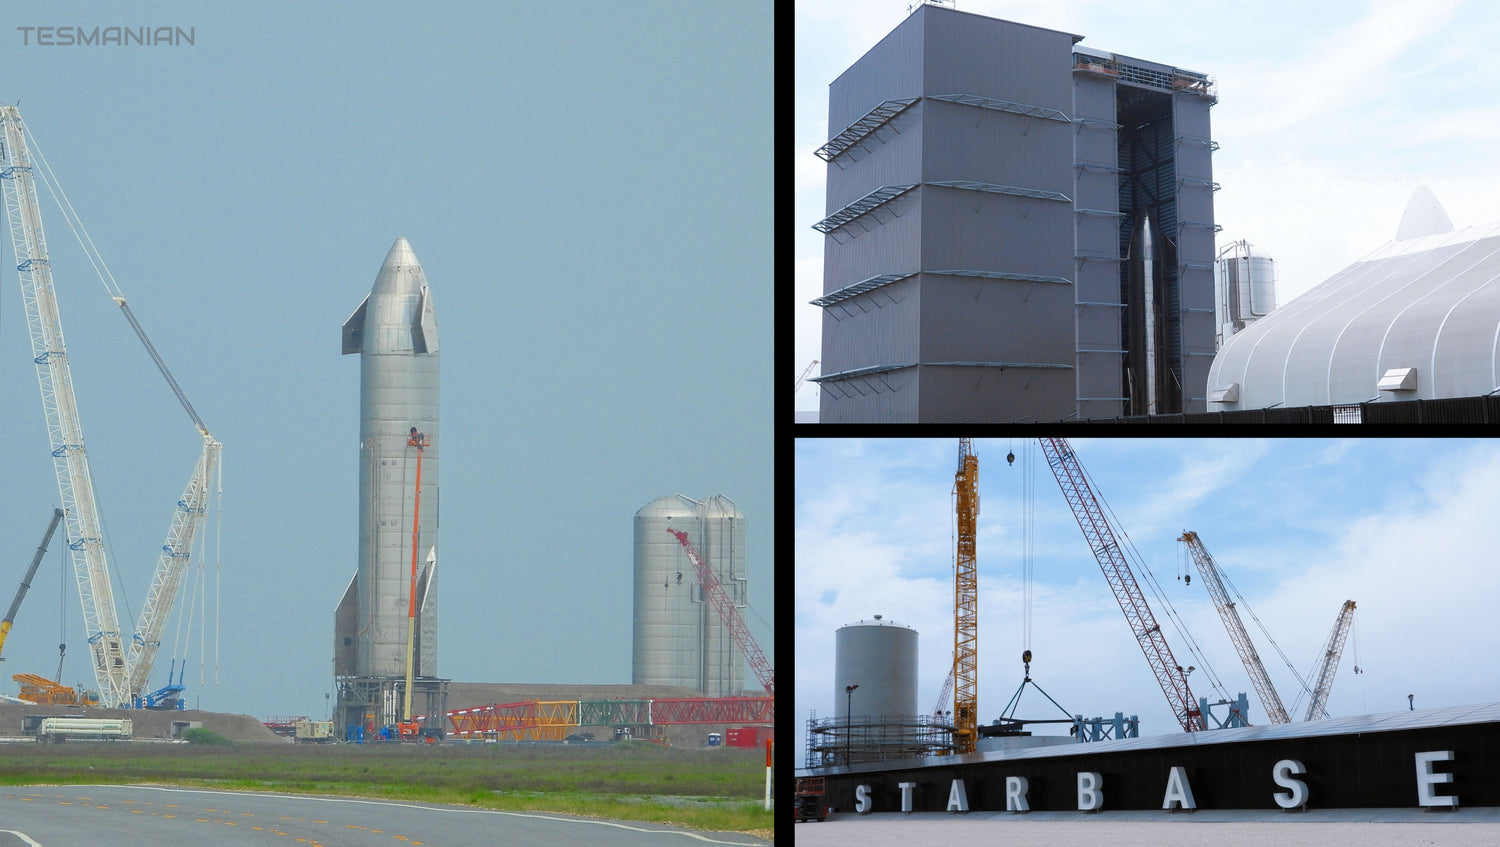 SpaceX Texas Launch Site Starts To Look Like A Welcoming Spaceport As 'Starbase' Sign Is Installed [photos]